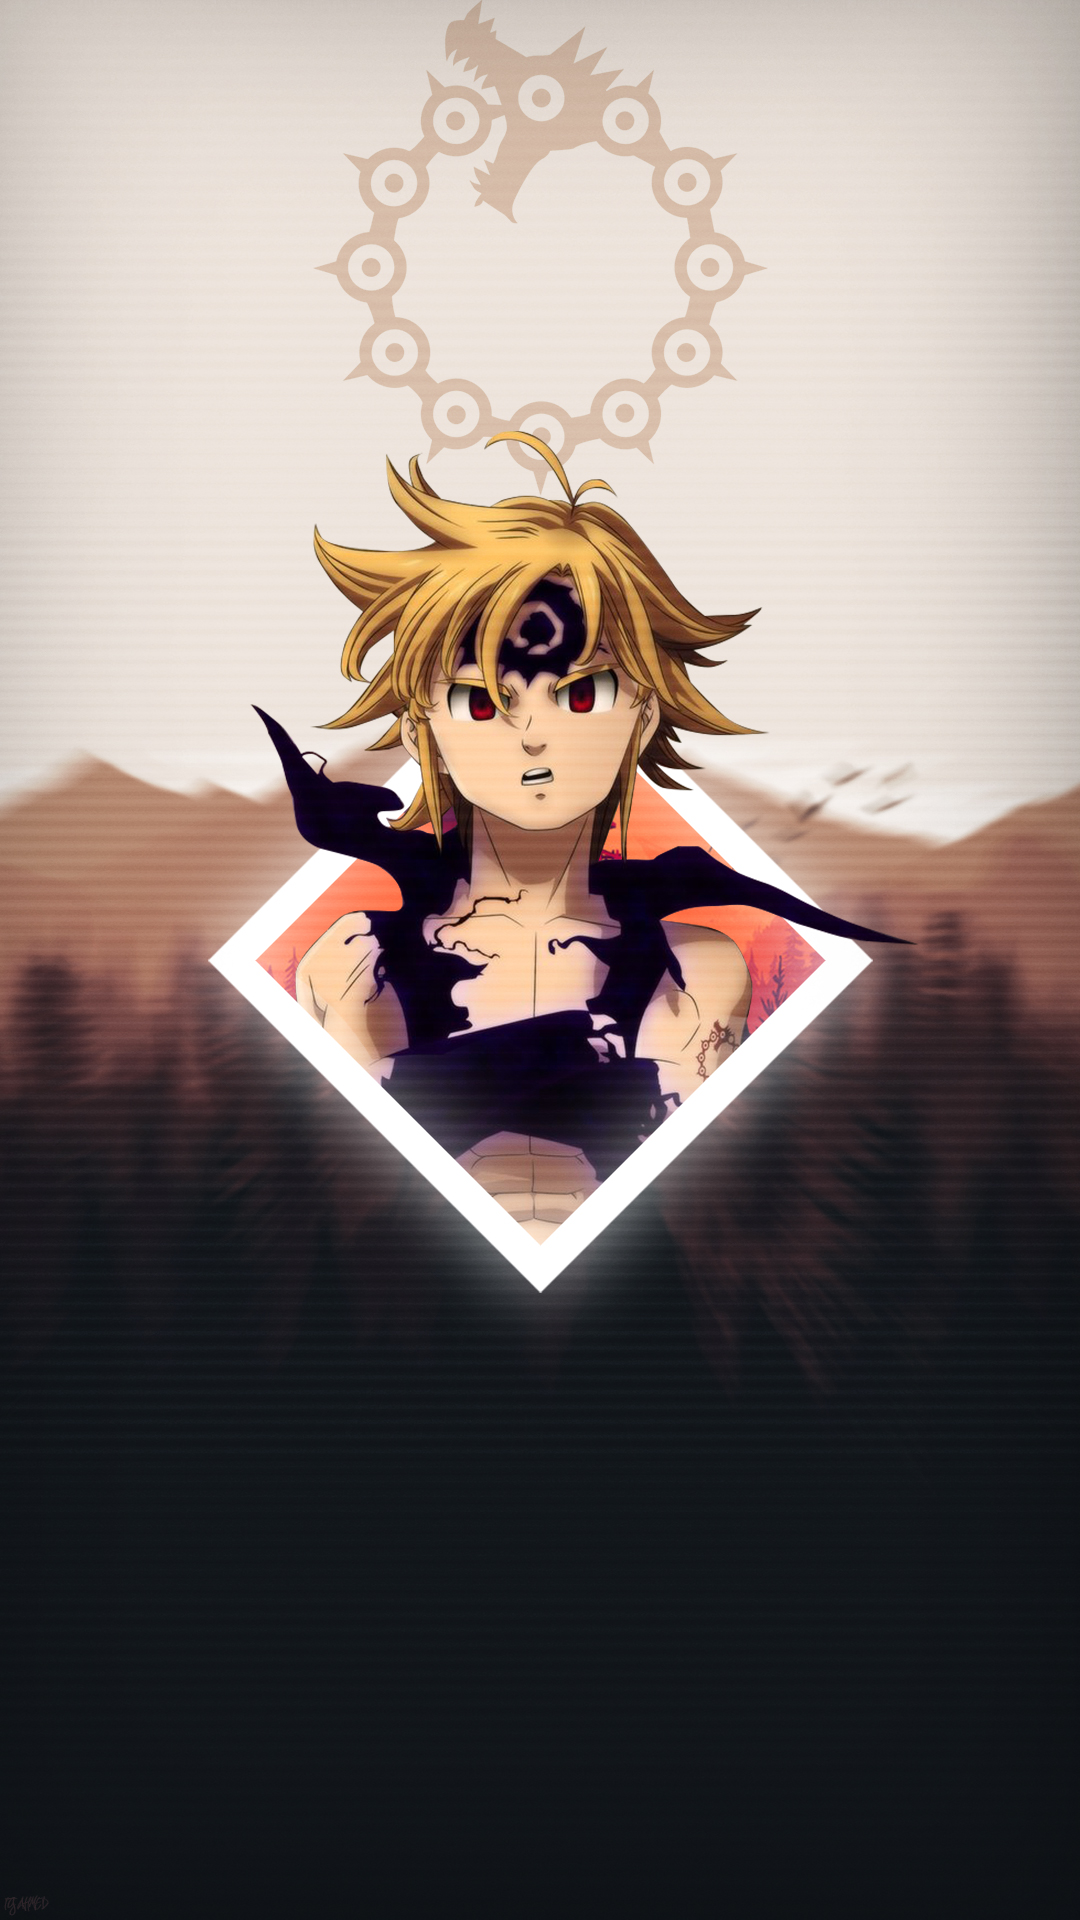 Meliodas mobile wallpaper made by me feel free to use